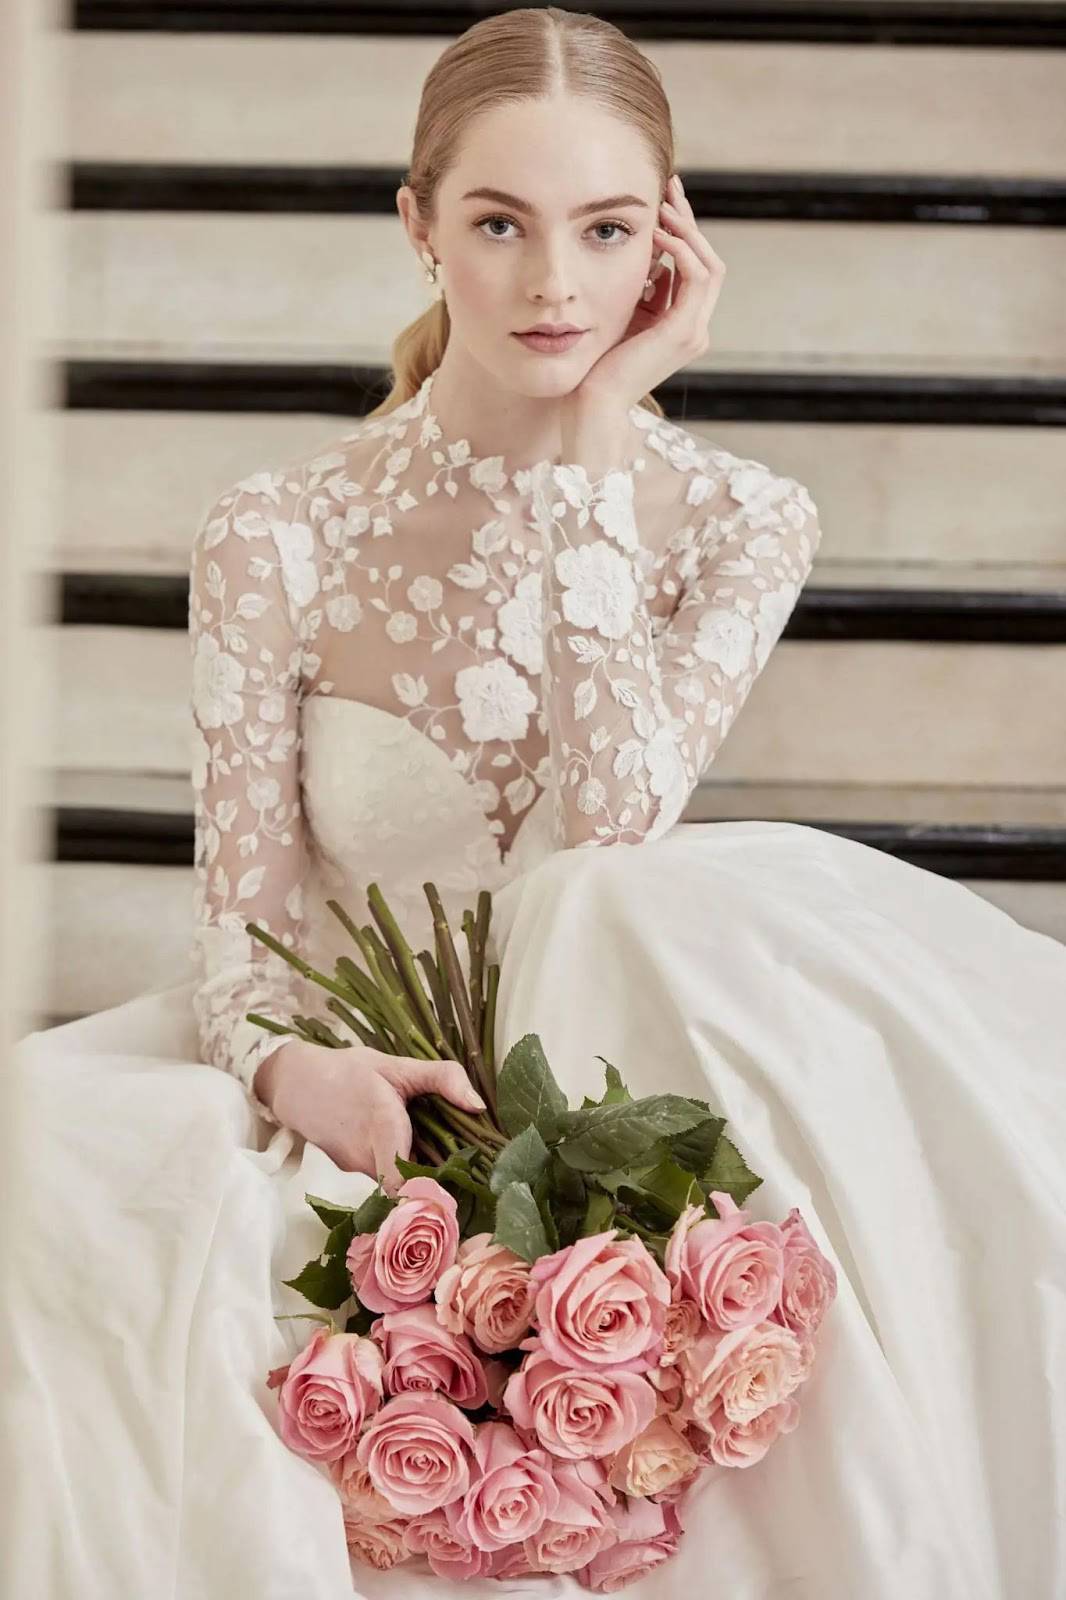 Wedding Dresses Perfect for Fall/Winter Weddings Image